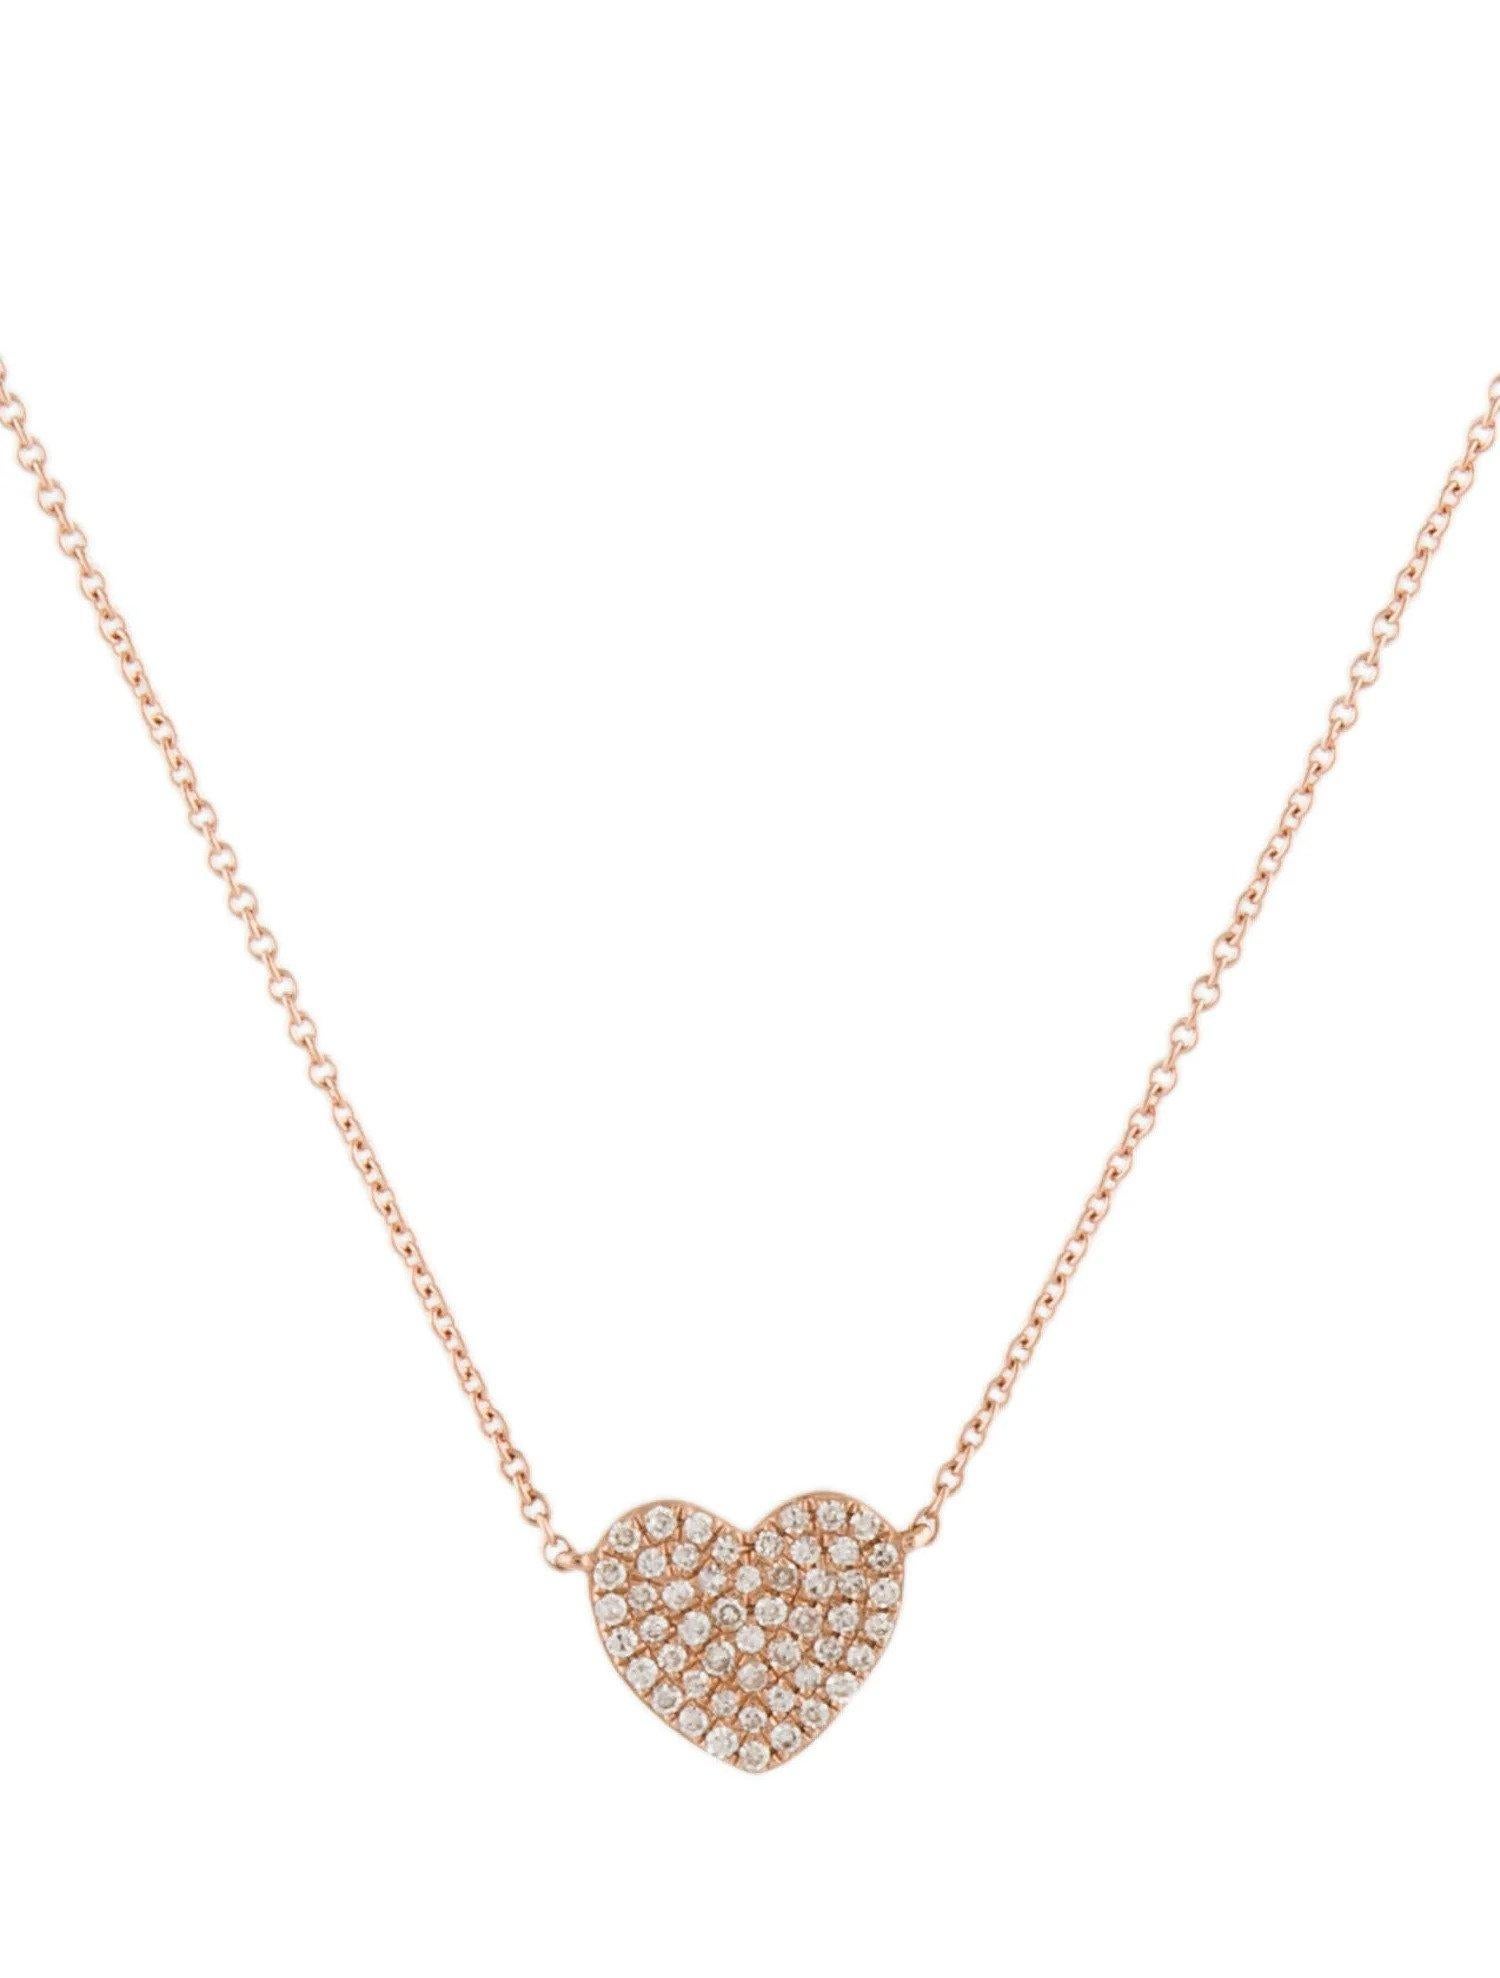 0.16 Carat Diamond Heart Rose Gold Pendant In New Condition For Sale In Great Neck, NY